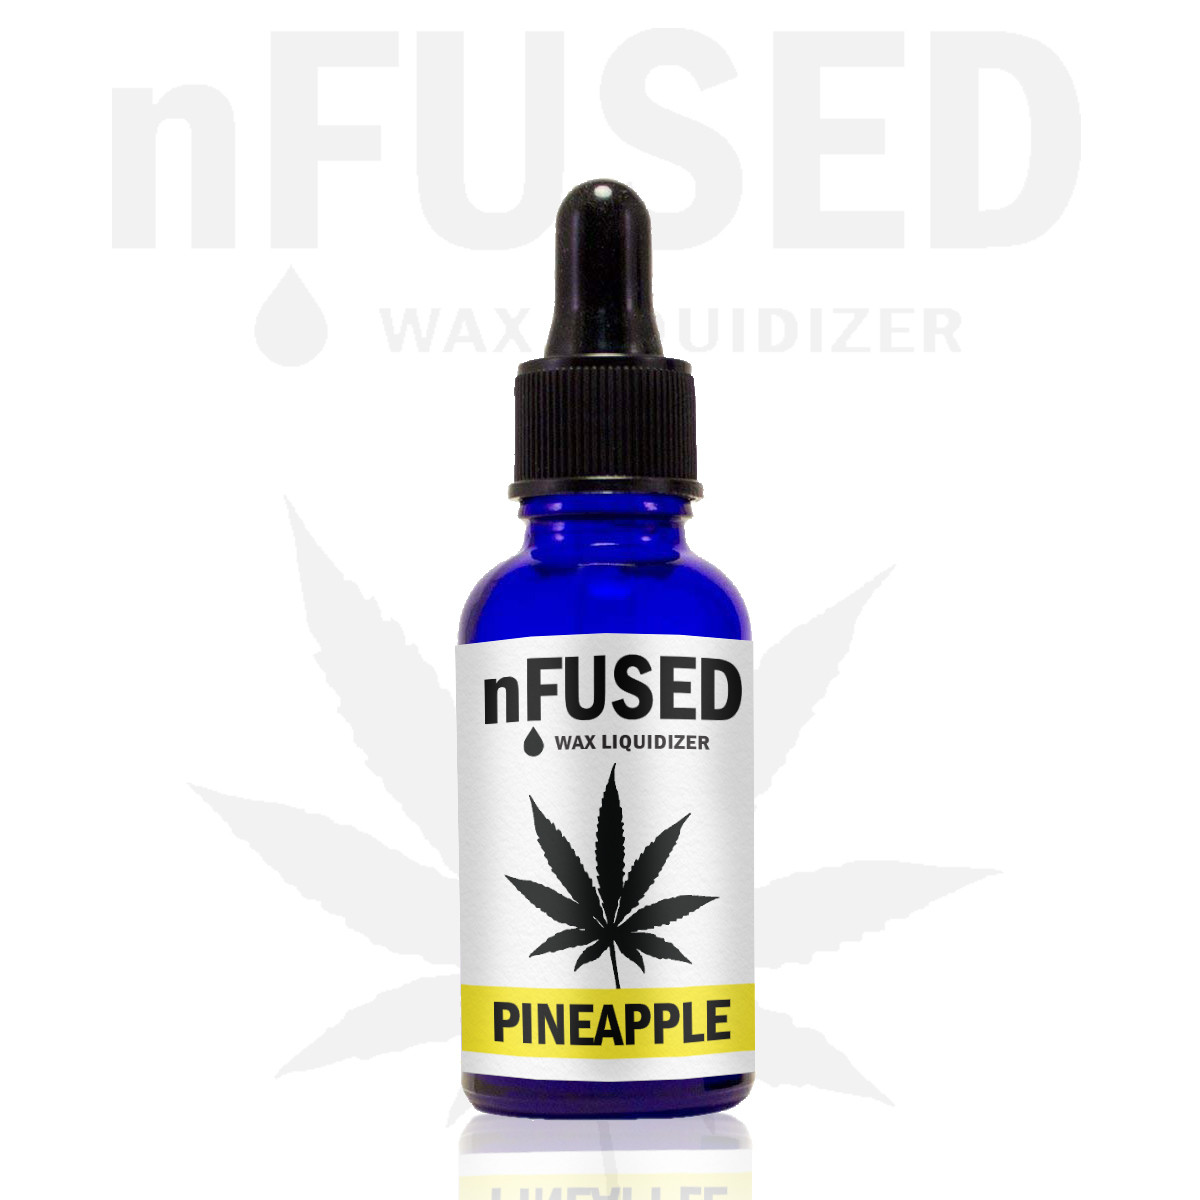 nFUSED - WAX LIQUIDIZER PINEAPPLE EXPRESS